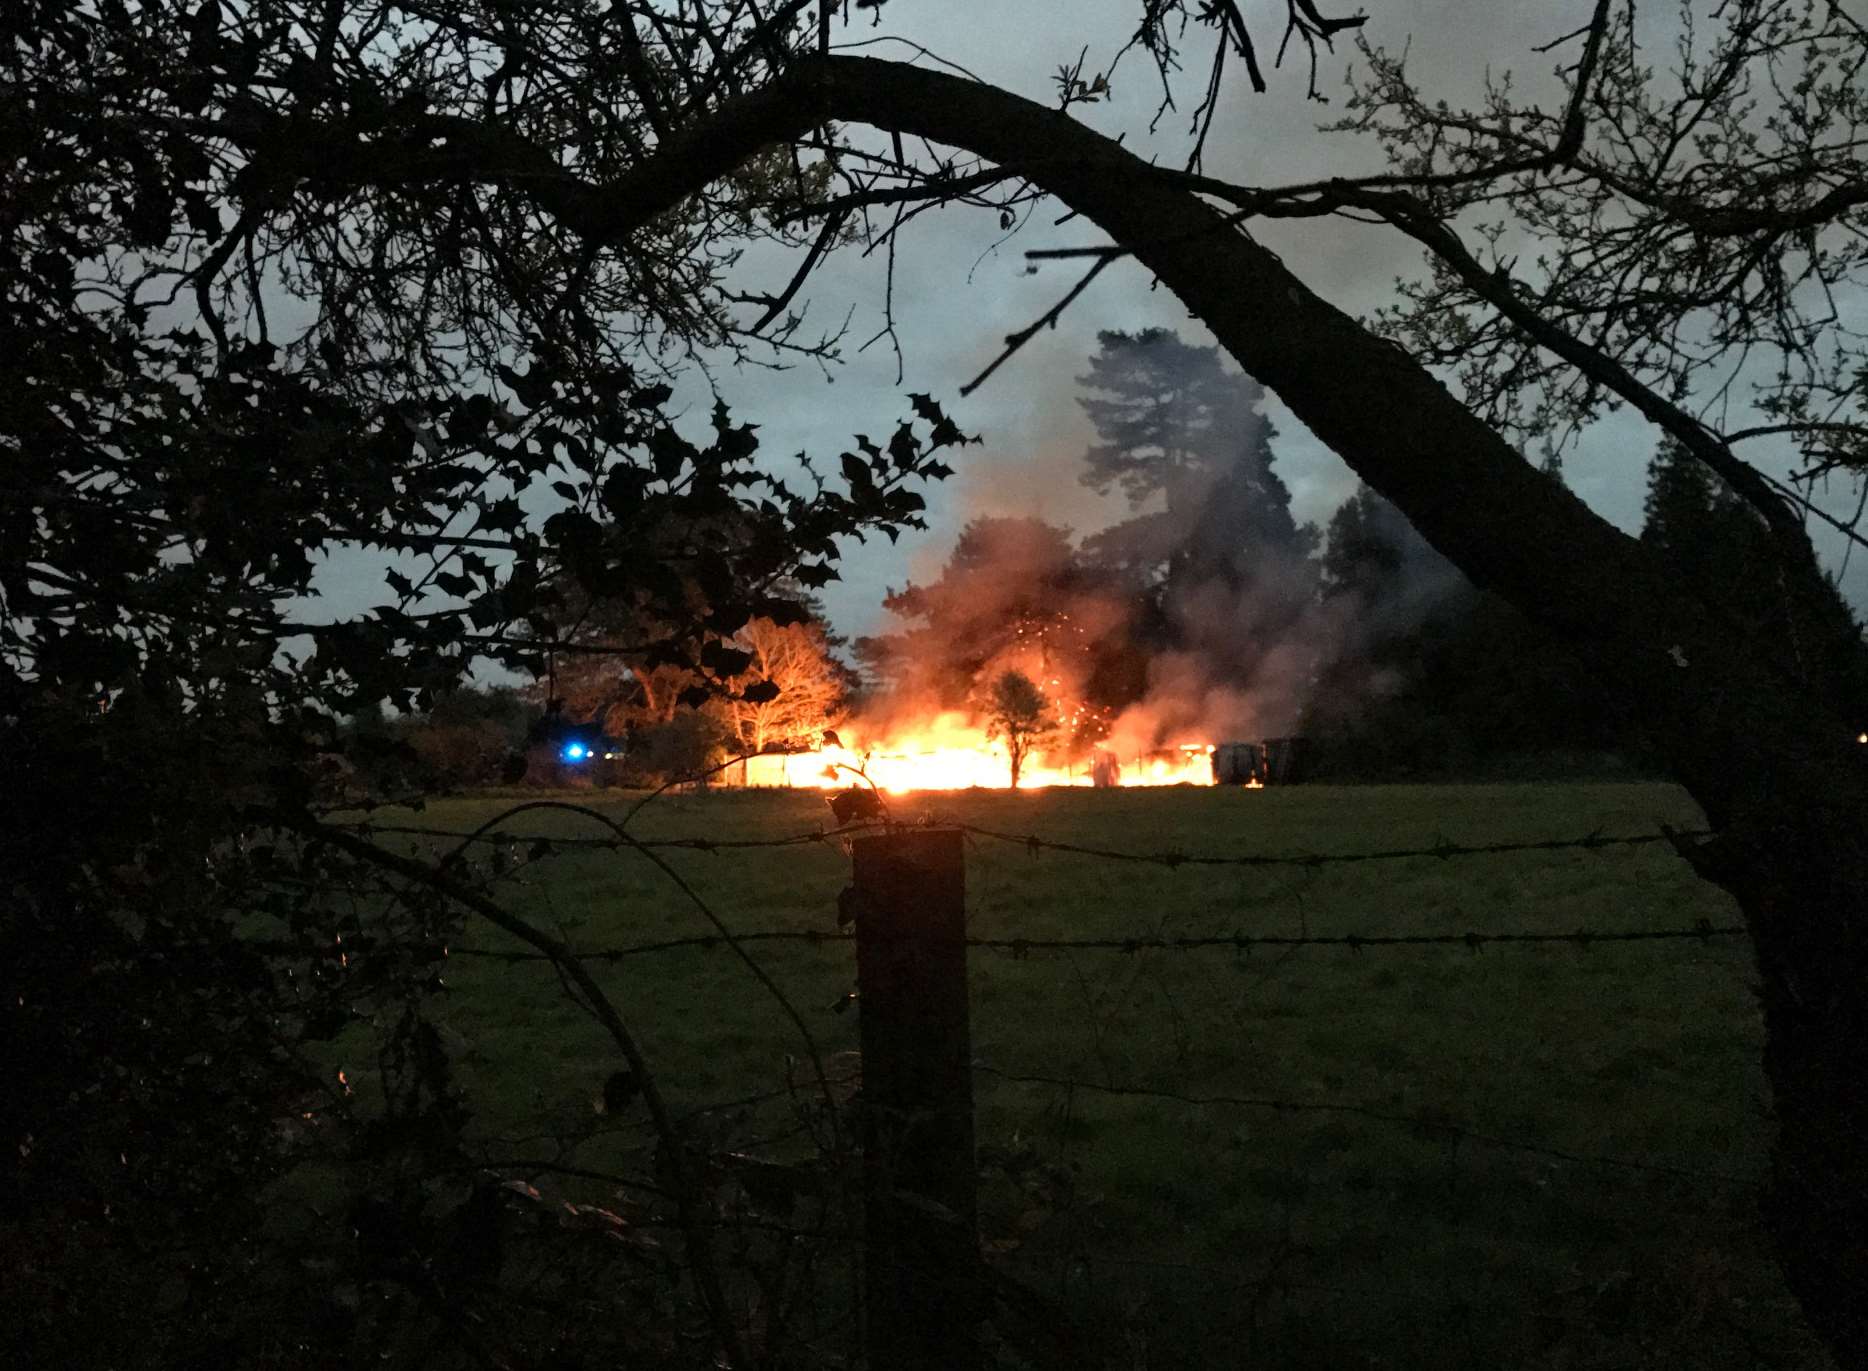 The fire destroyed a stable block and trees